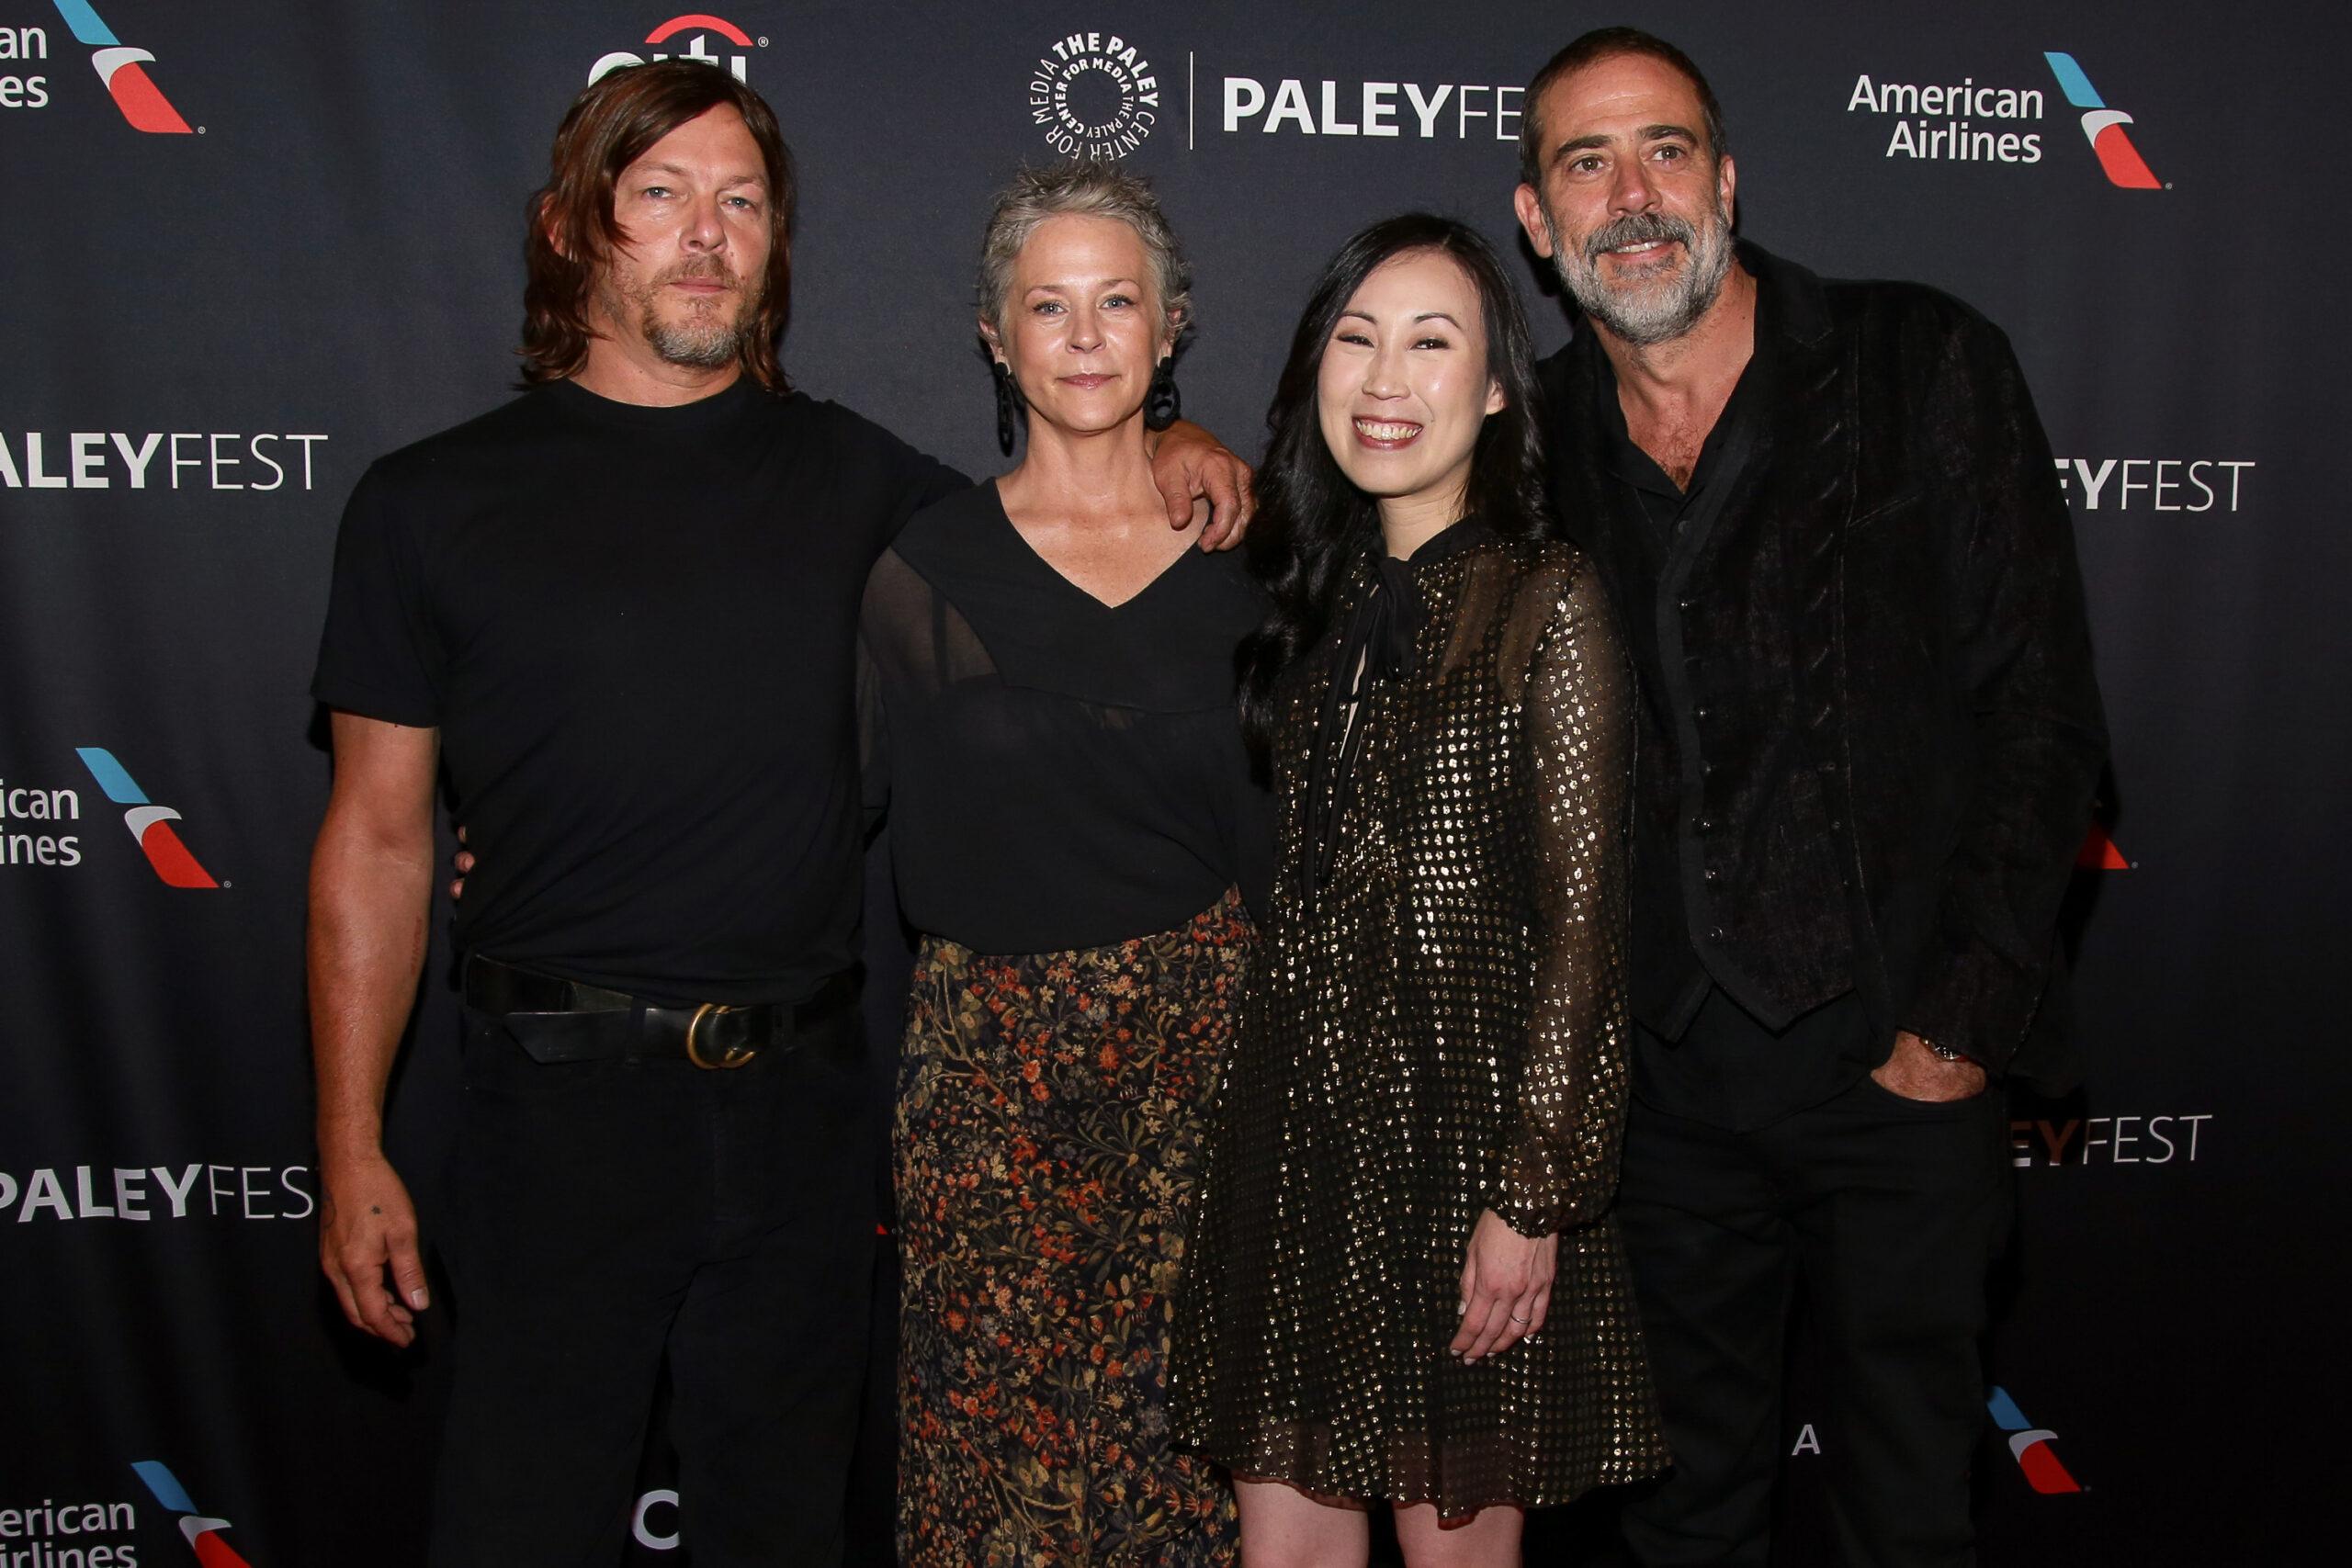 The Walking Dead at Paley Fest New York 2018